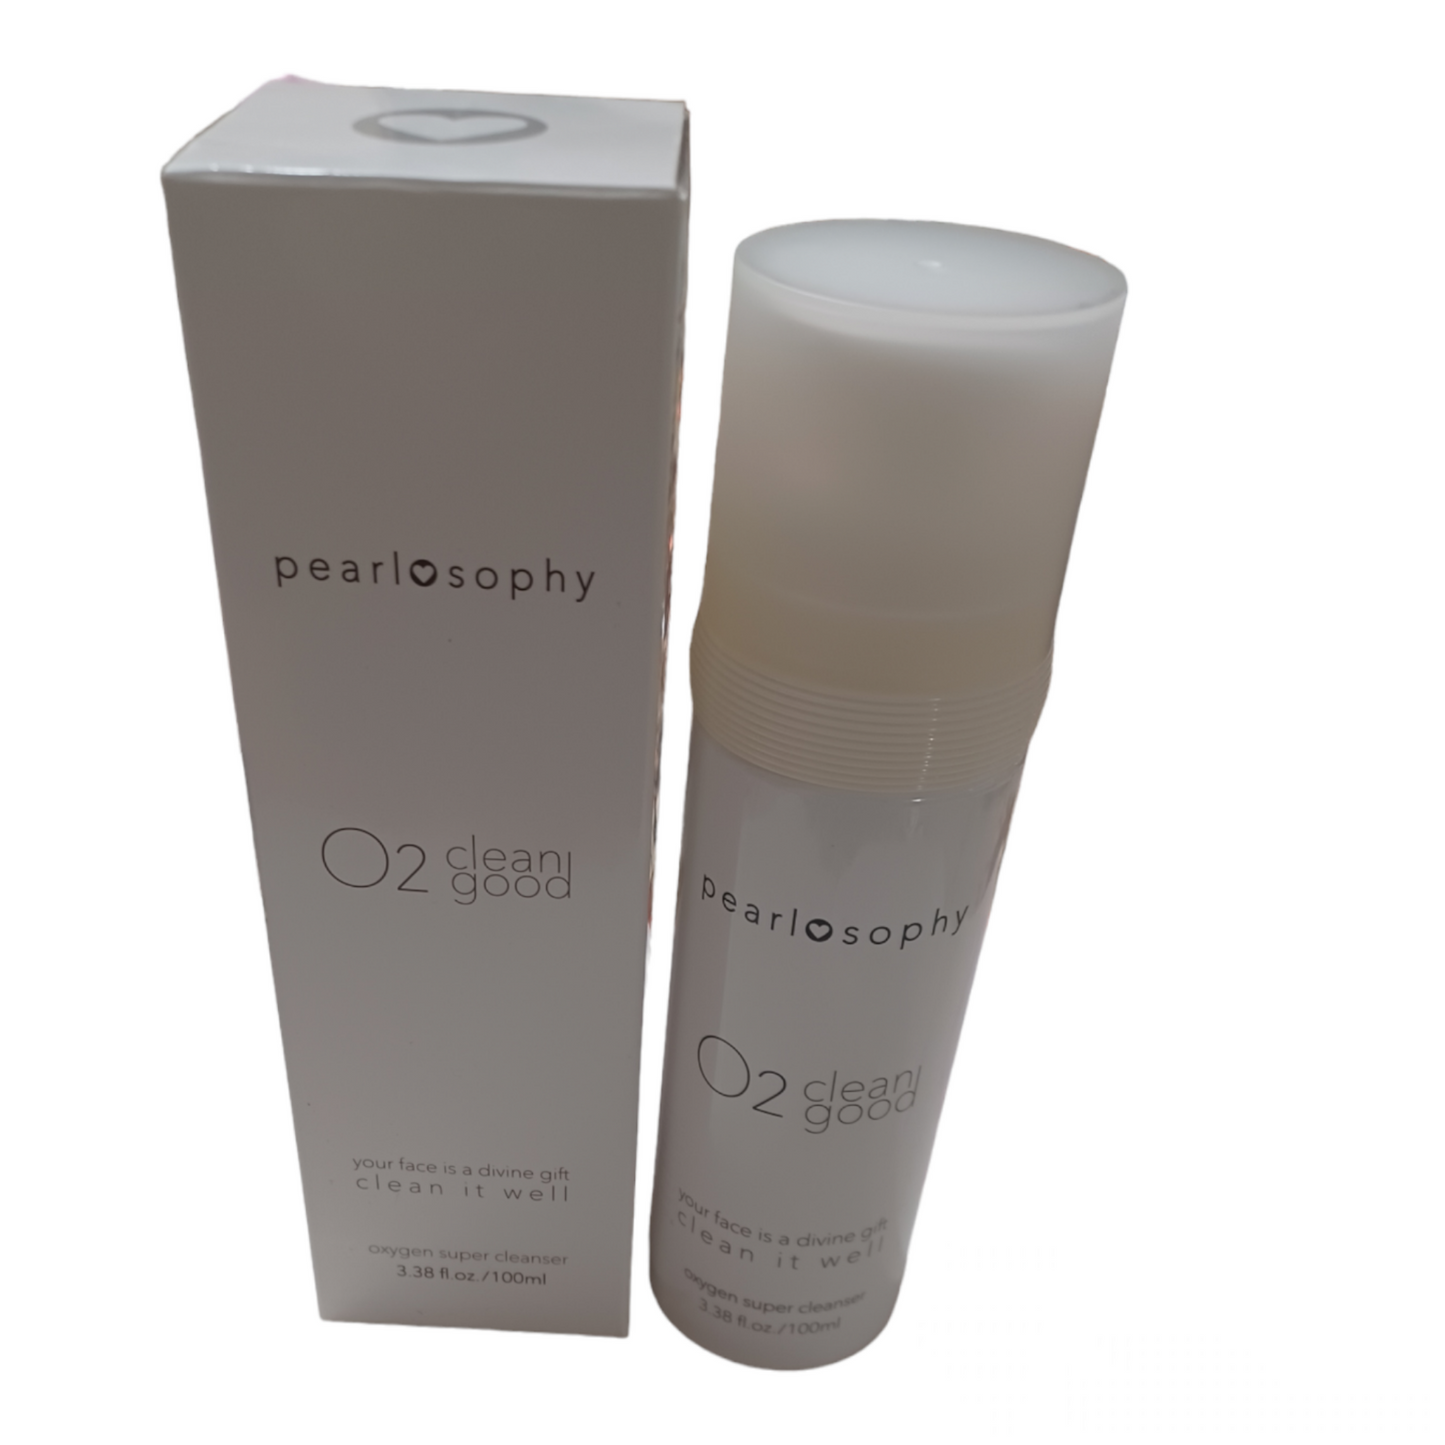 Pearlosophy O2 Oxygen Face Cleanser & Makeup Removal